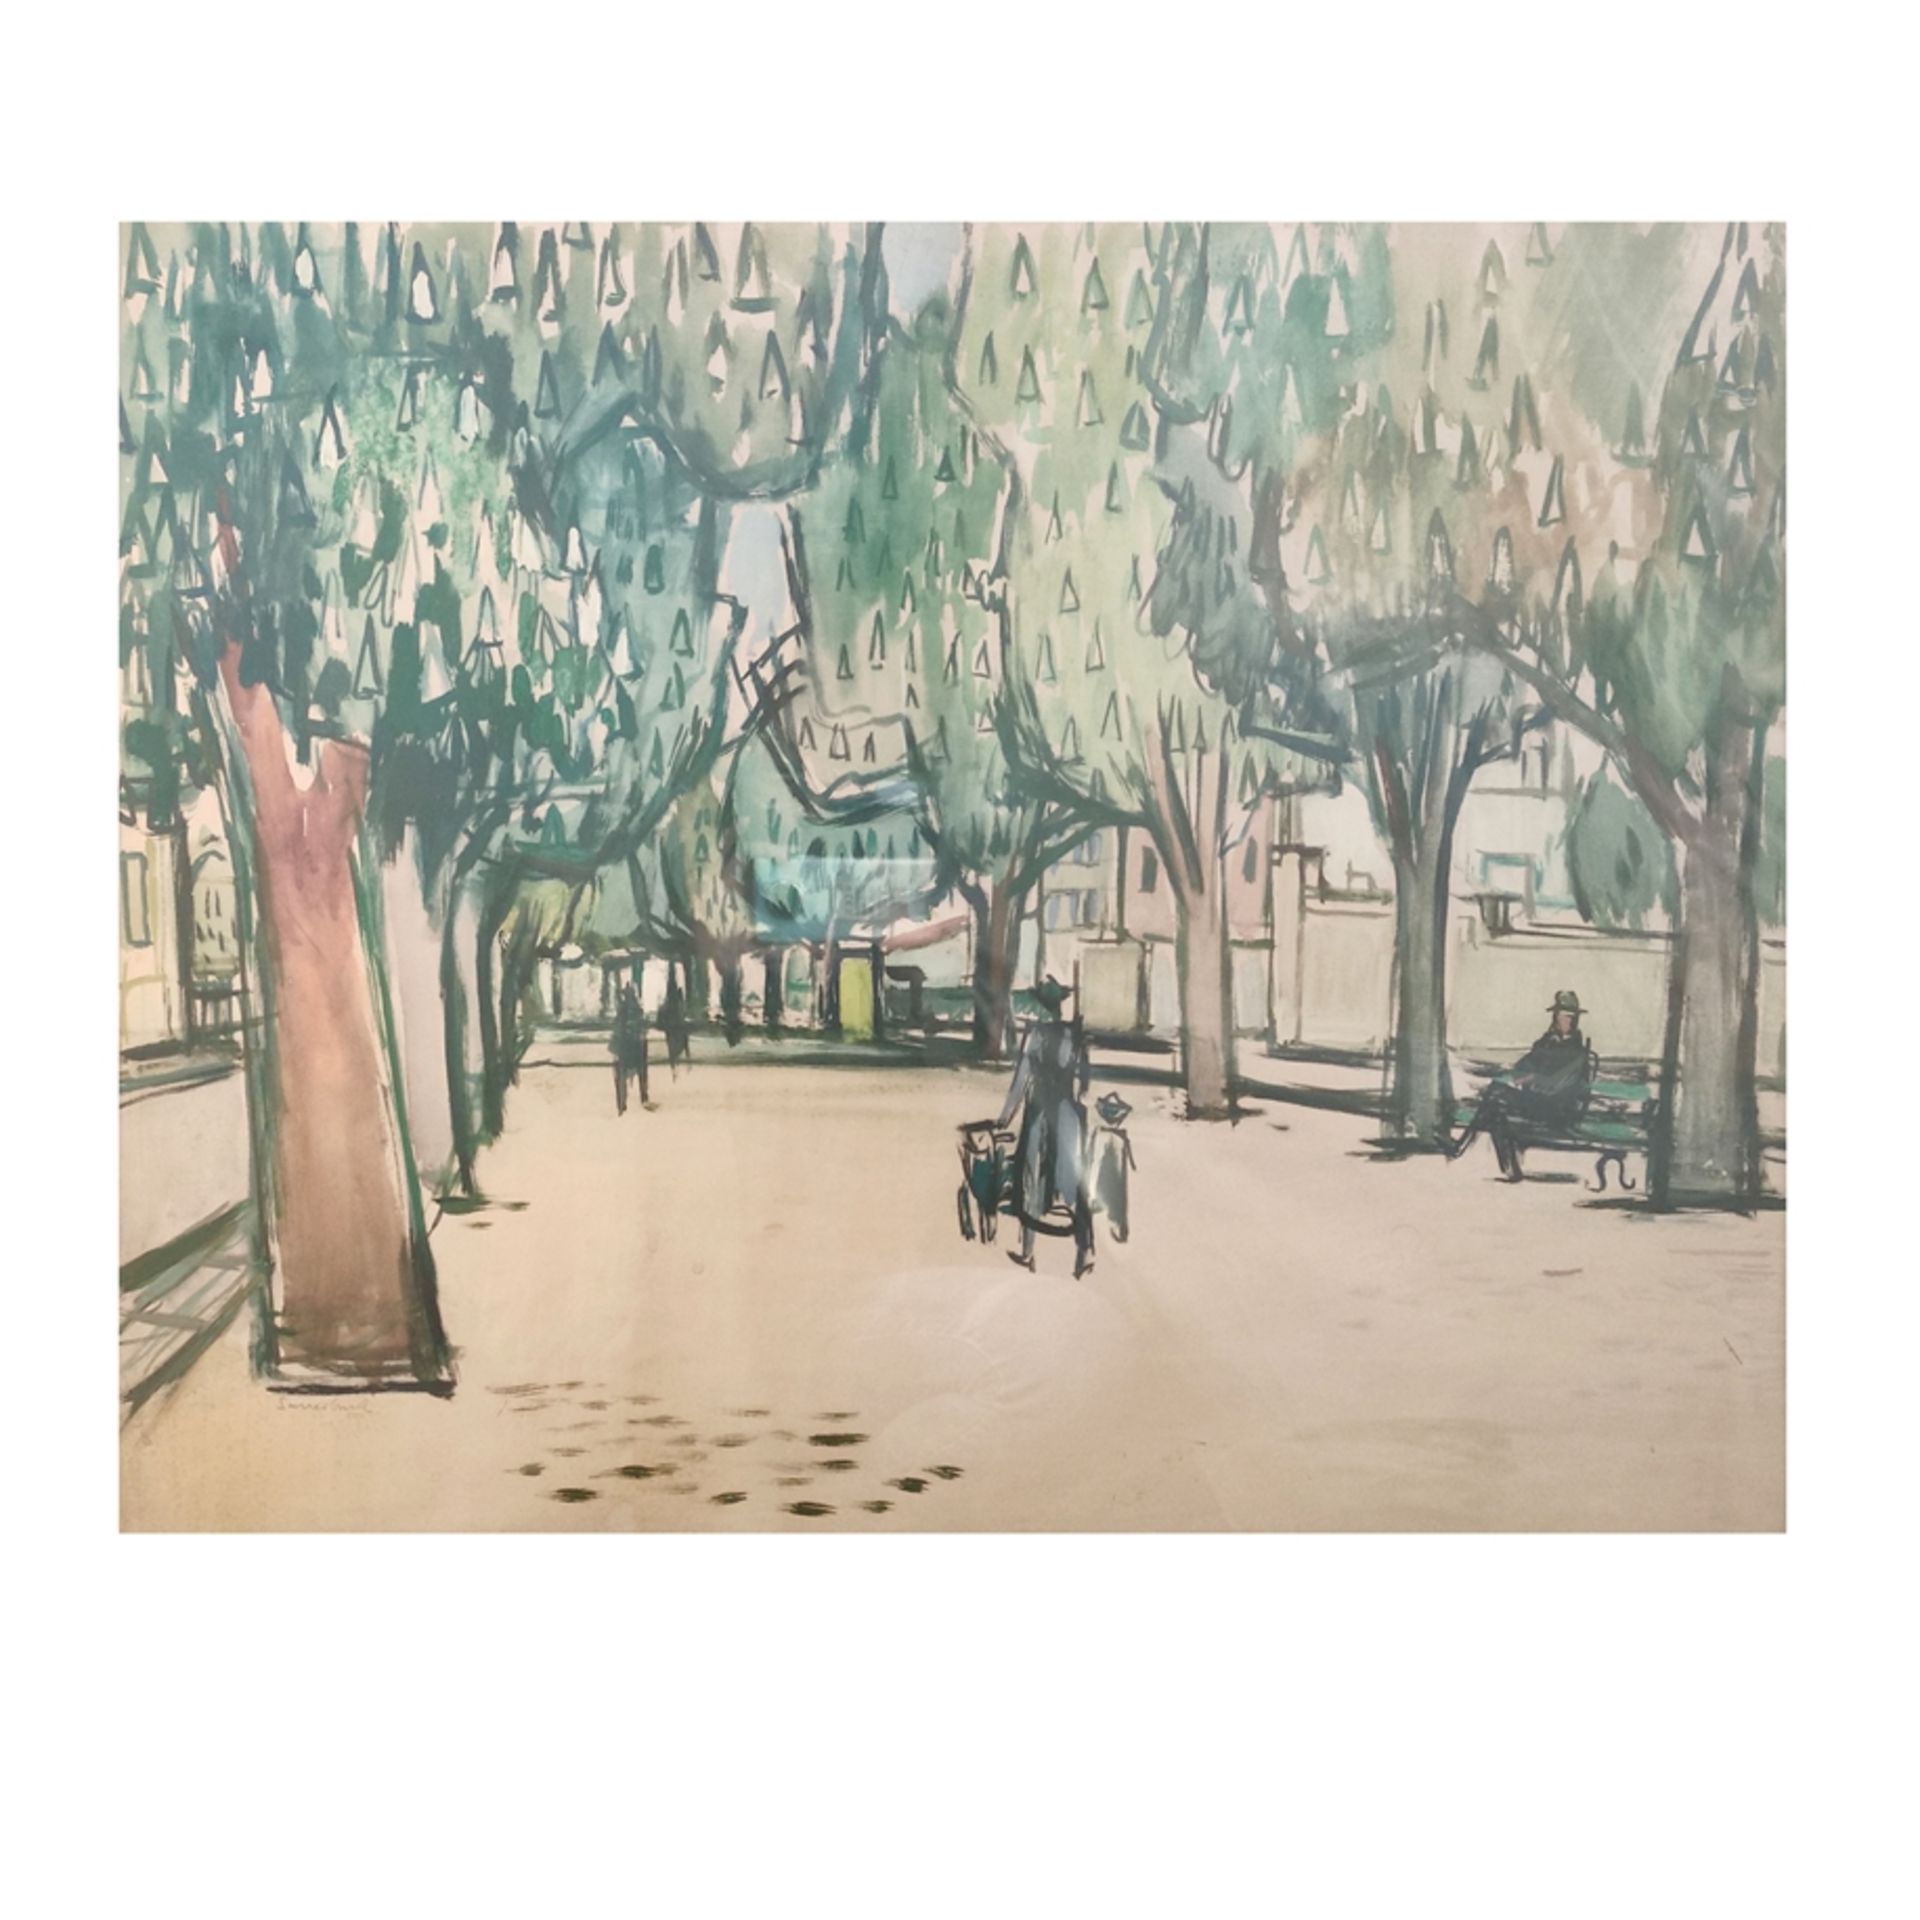 Sauerbruch, Hans (1910 Marburg - 1996 Constance) "Constance Arbor", with lush green trees and strol